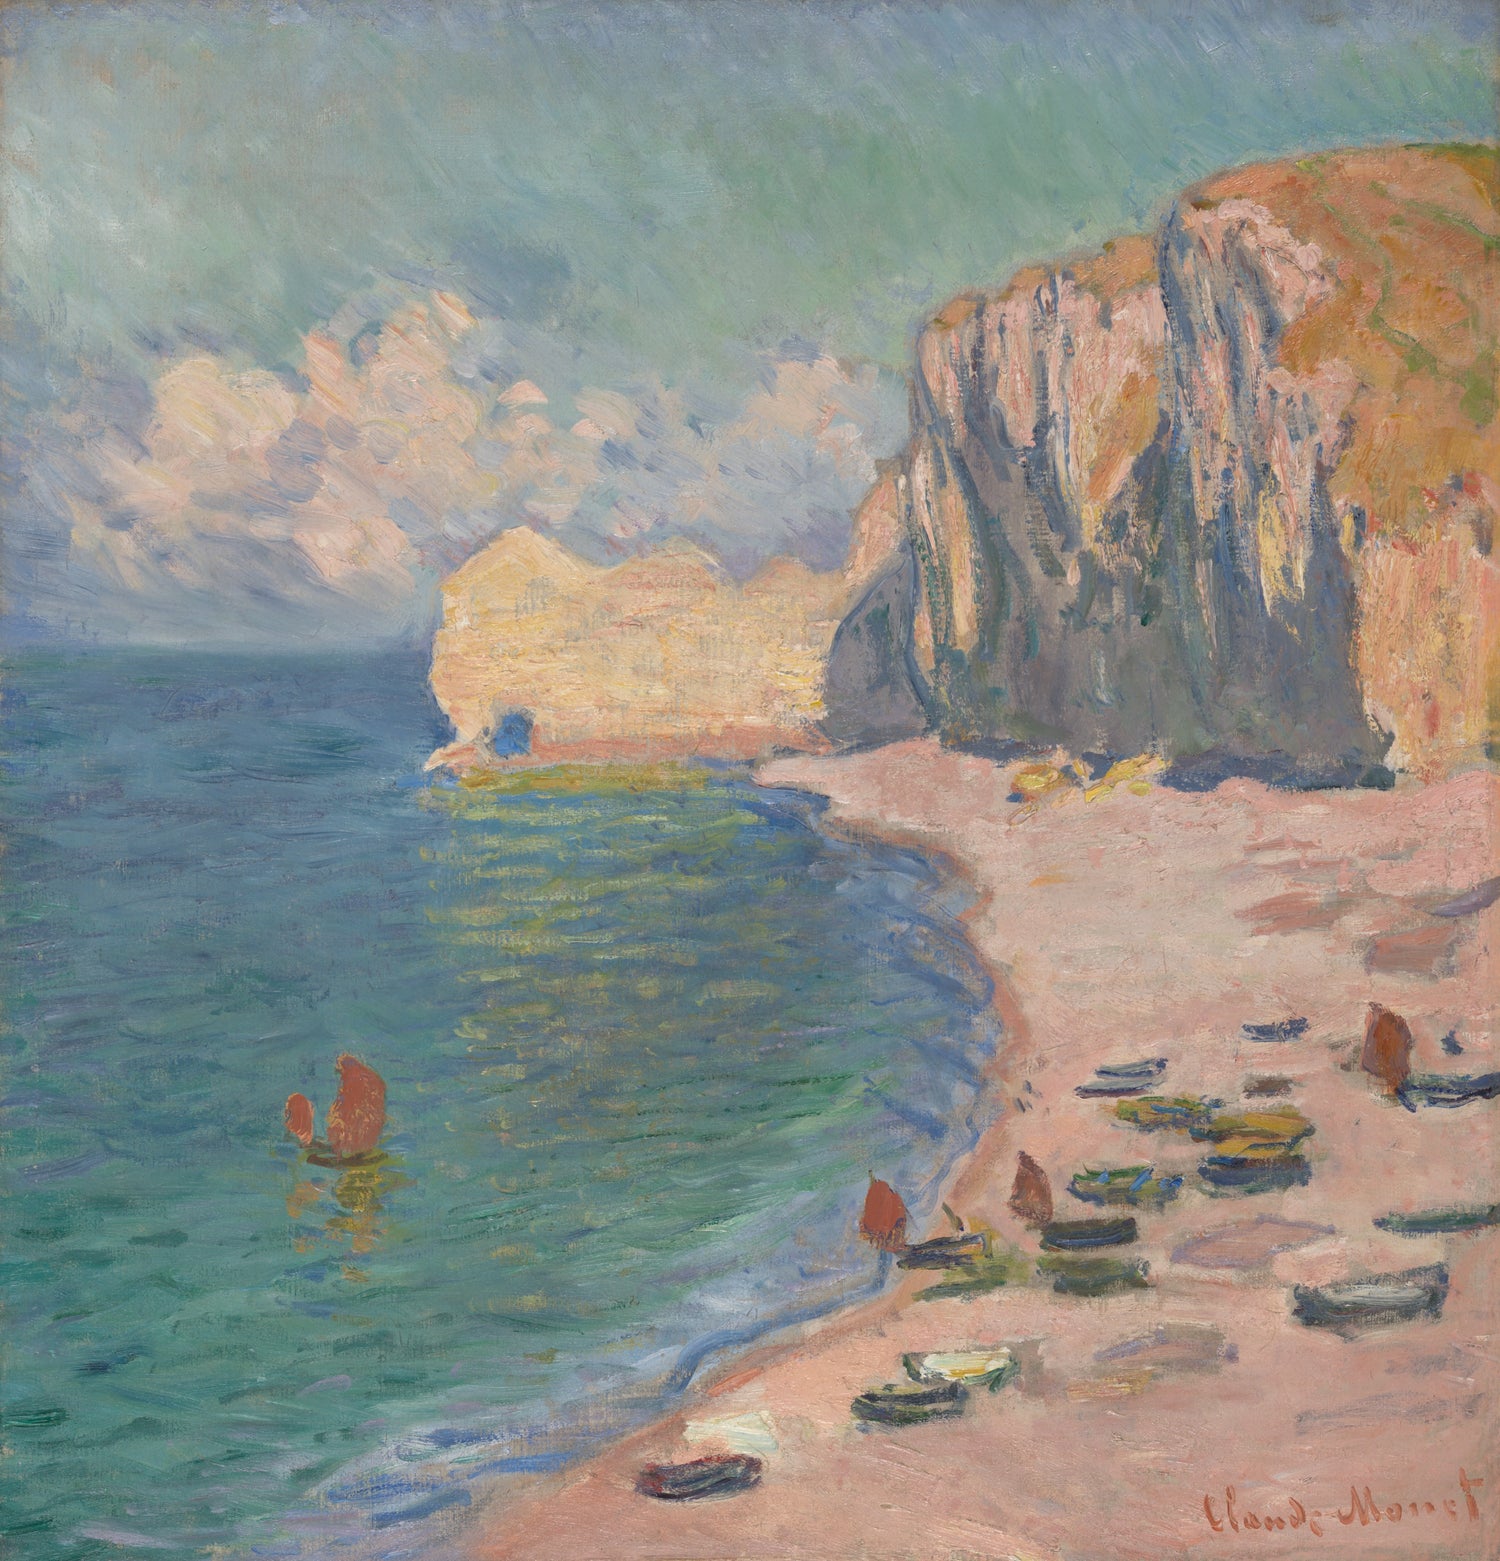 The Beach and the Falaise d'Amont (France, 1885) | Claude Monet beach painting Posters, Prints, & Visual Artwork The Trumpet Shop   